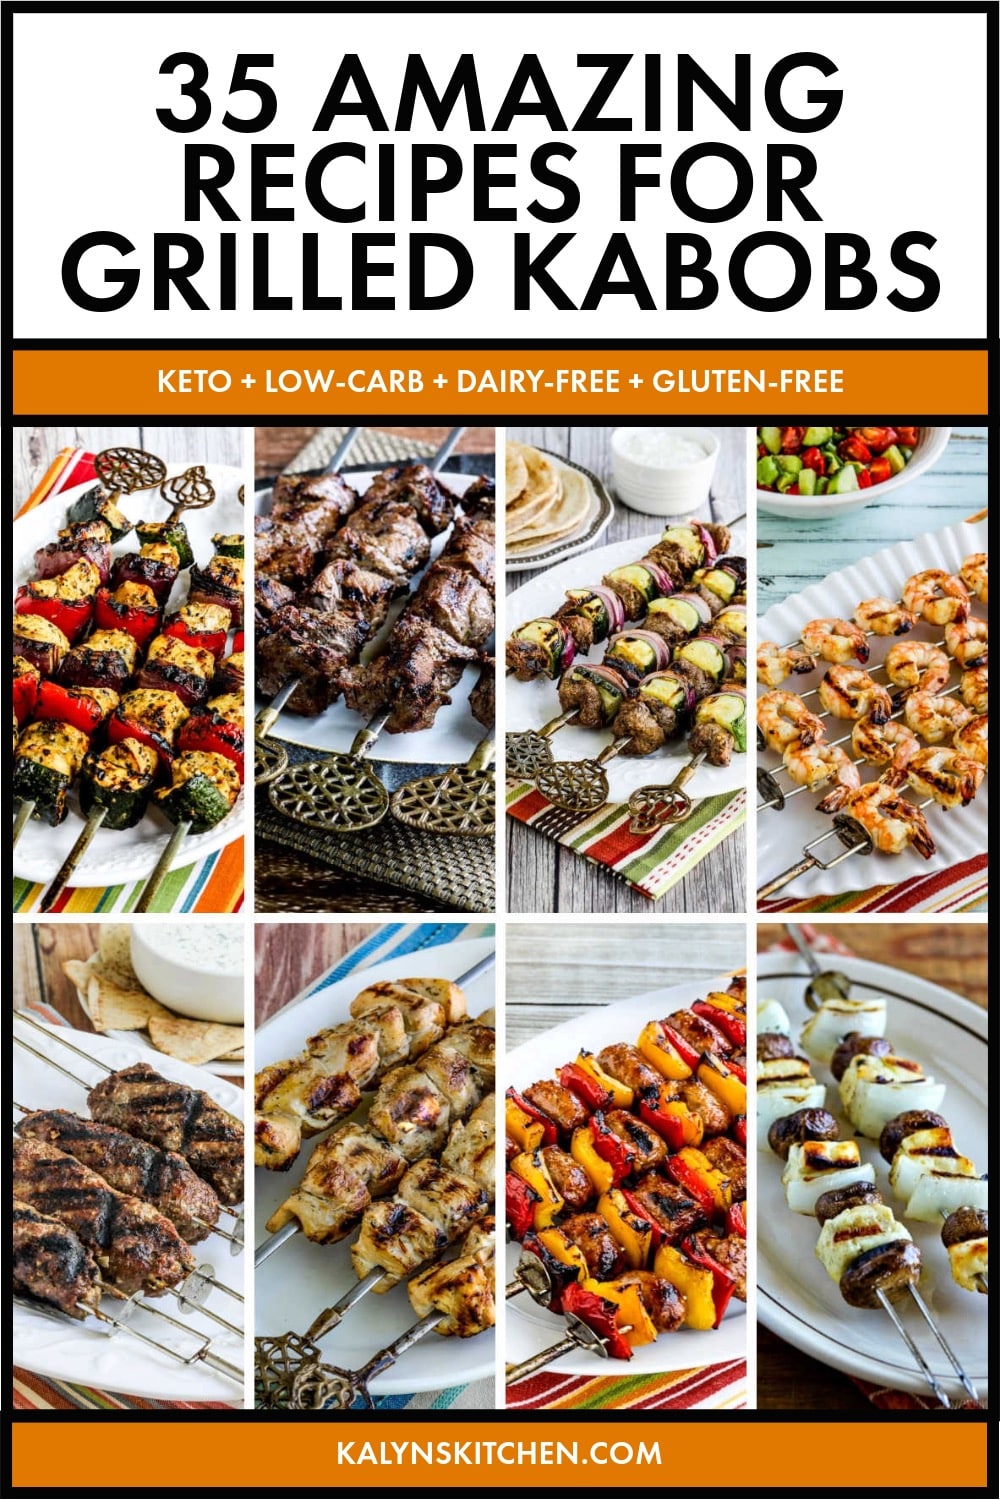 Pinterest image of 35 Amazing Recipes for Grilled Kabobs